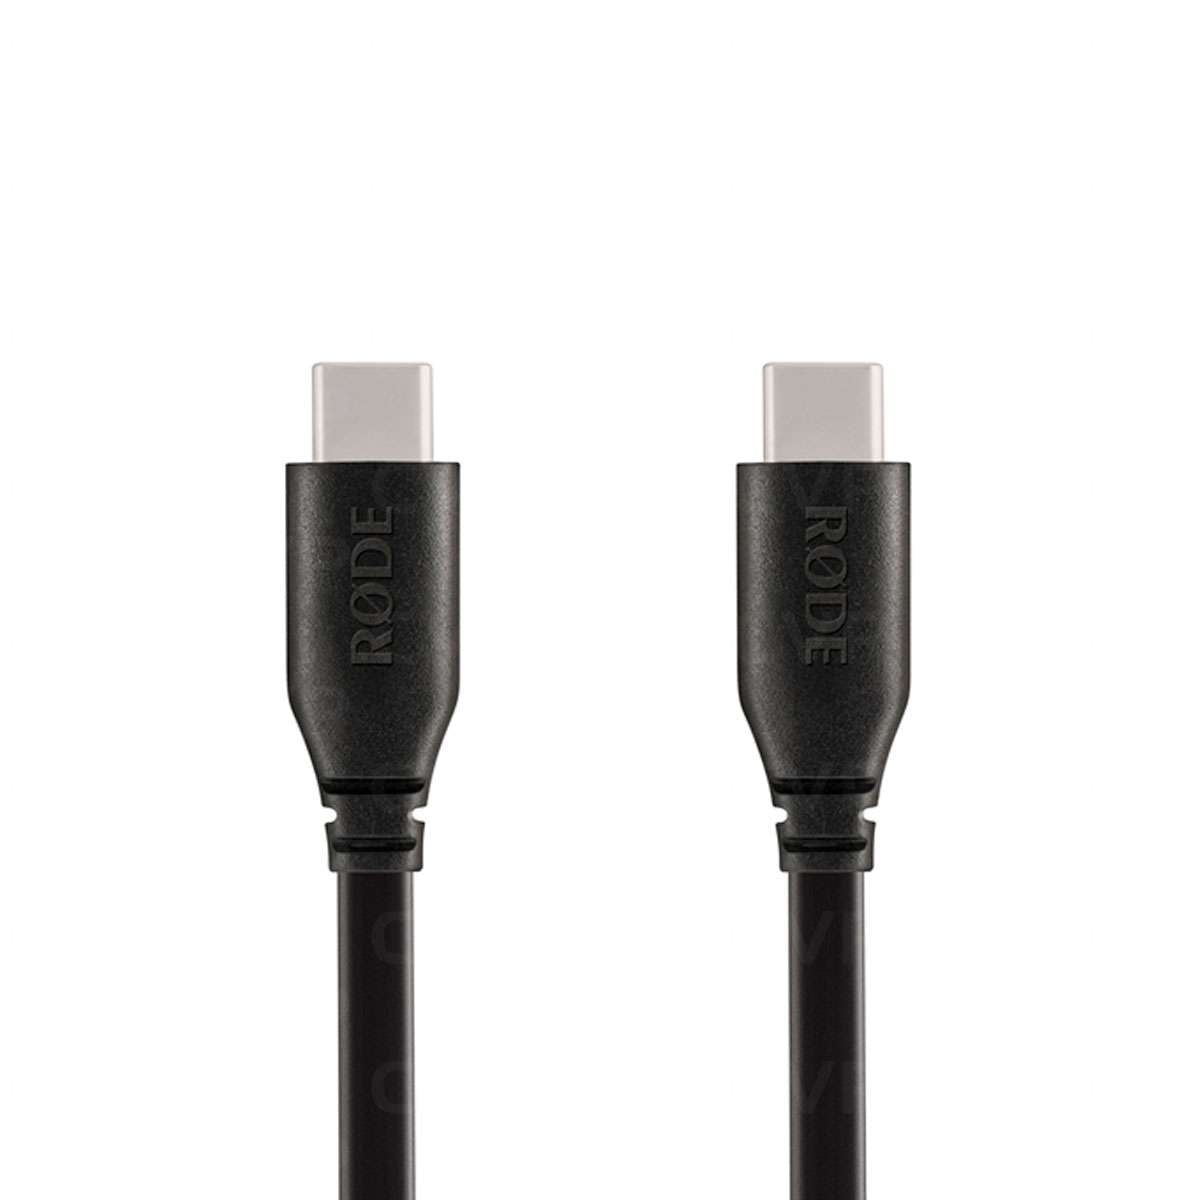 Rode SC17 1.5m Shielded USB Type-C to USB Type-C Cable ideal for Devices with USB-C Input